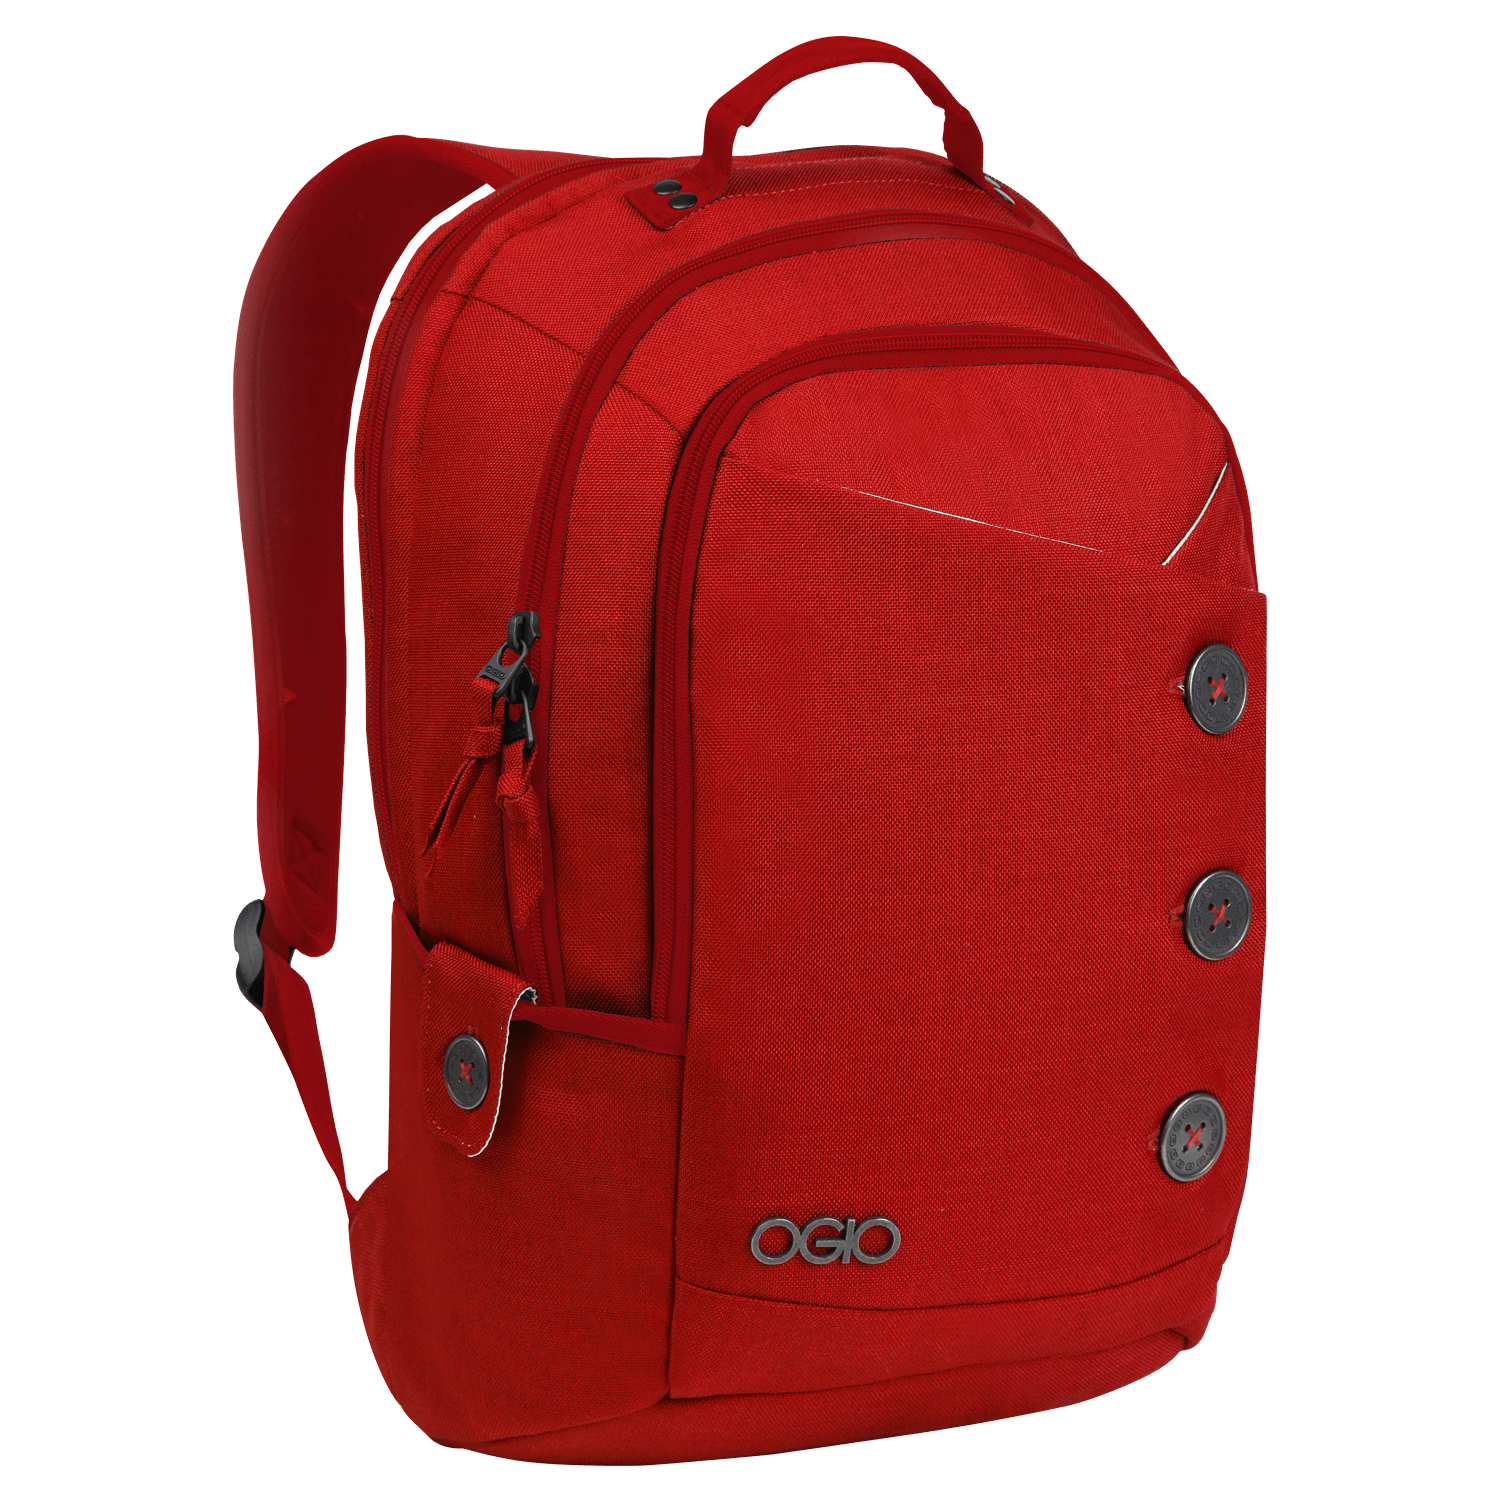 Ogio Red Backpack - Backpack, Transparent background PNG HD thumbnail